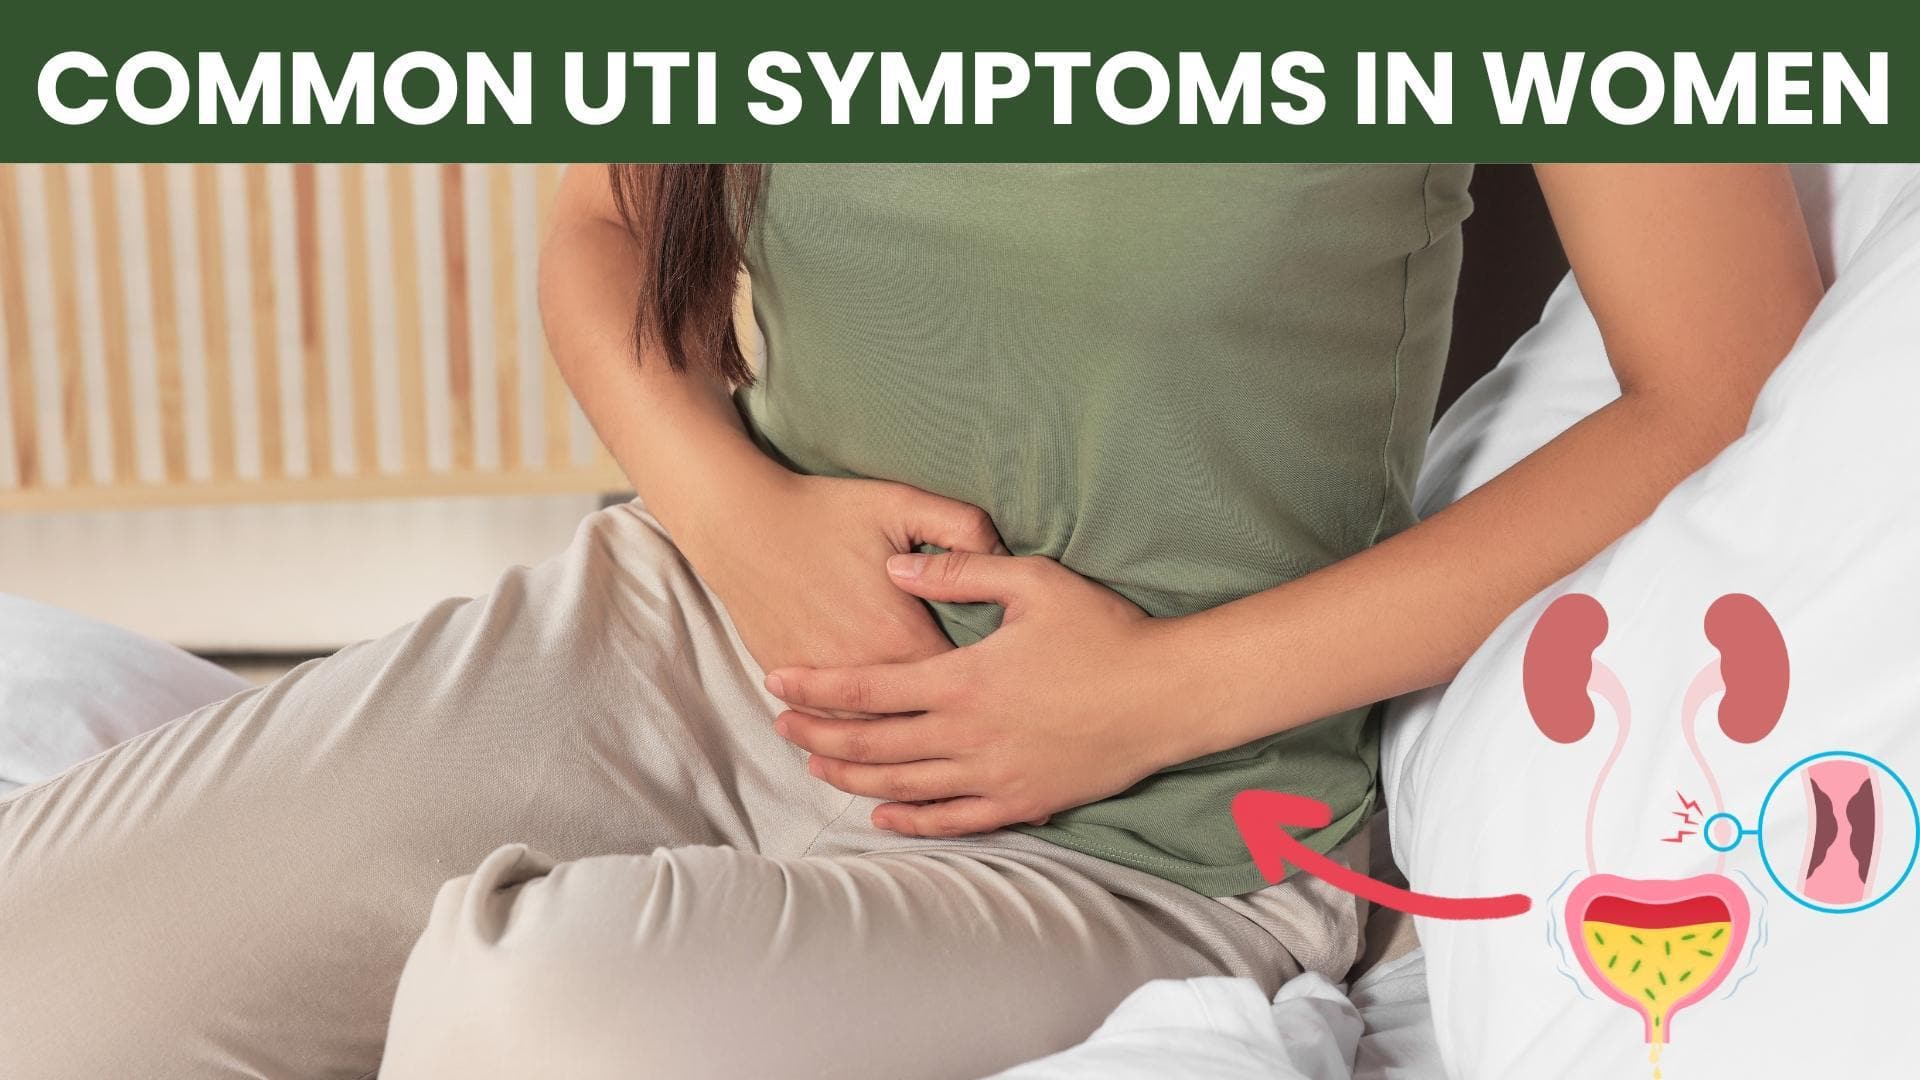 UTI Symptoms: What You Need to Know About Urinary Tract Infections | TheHealthSite.com